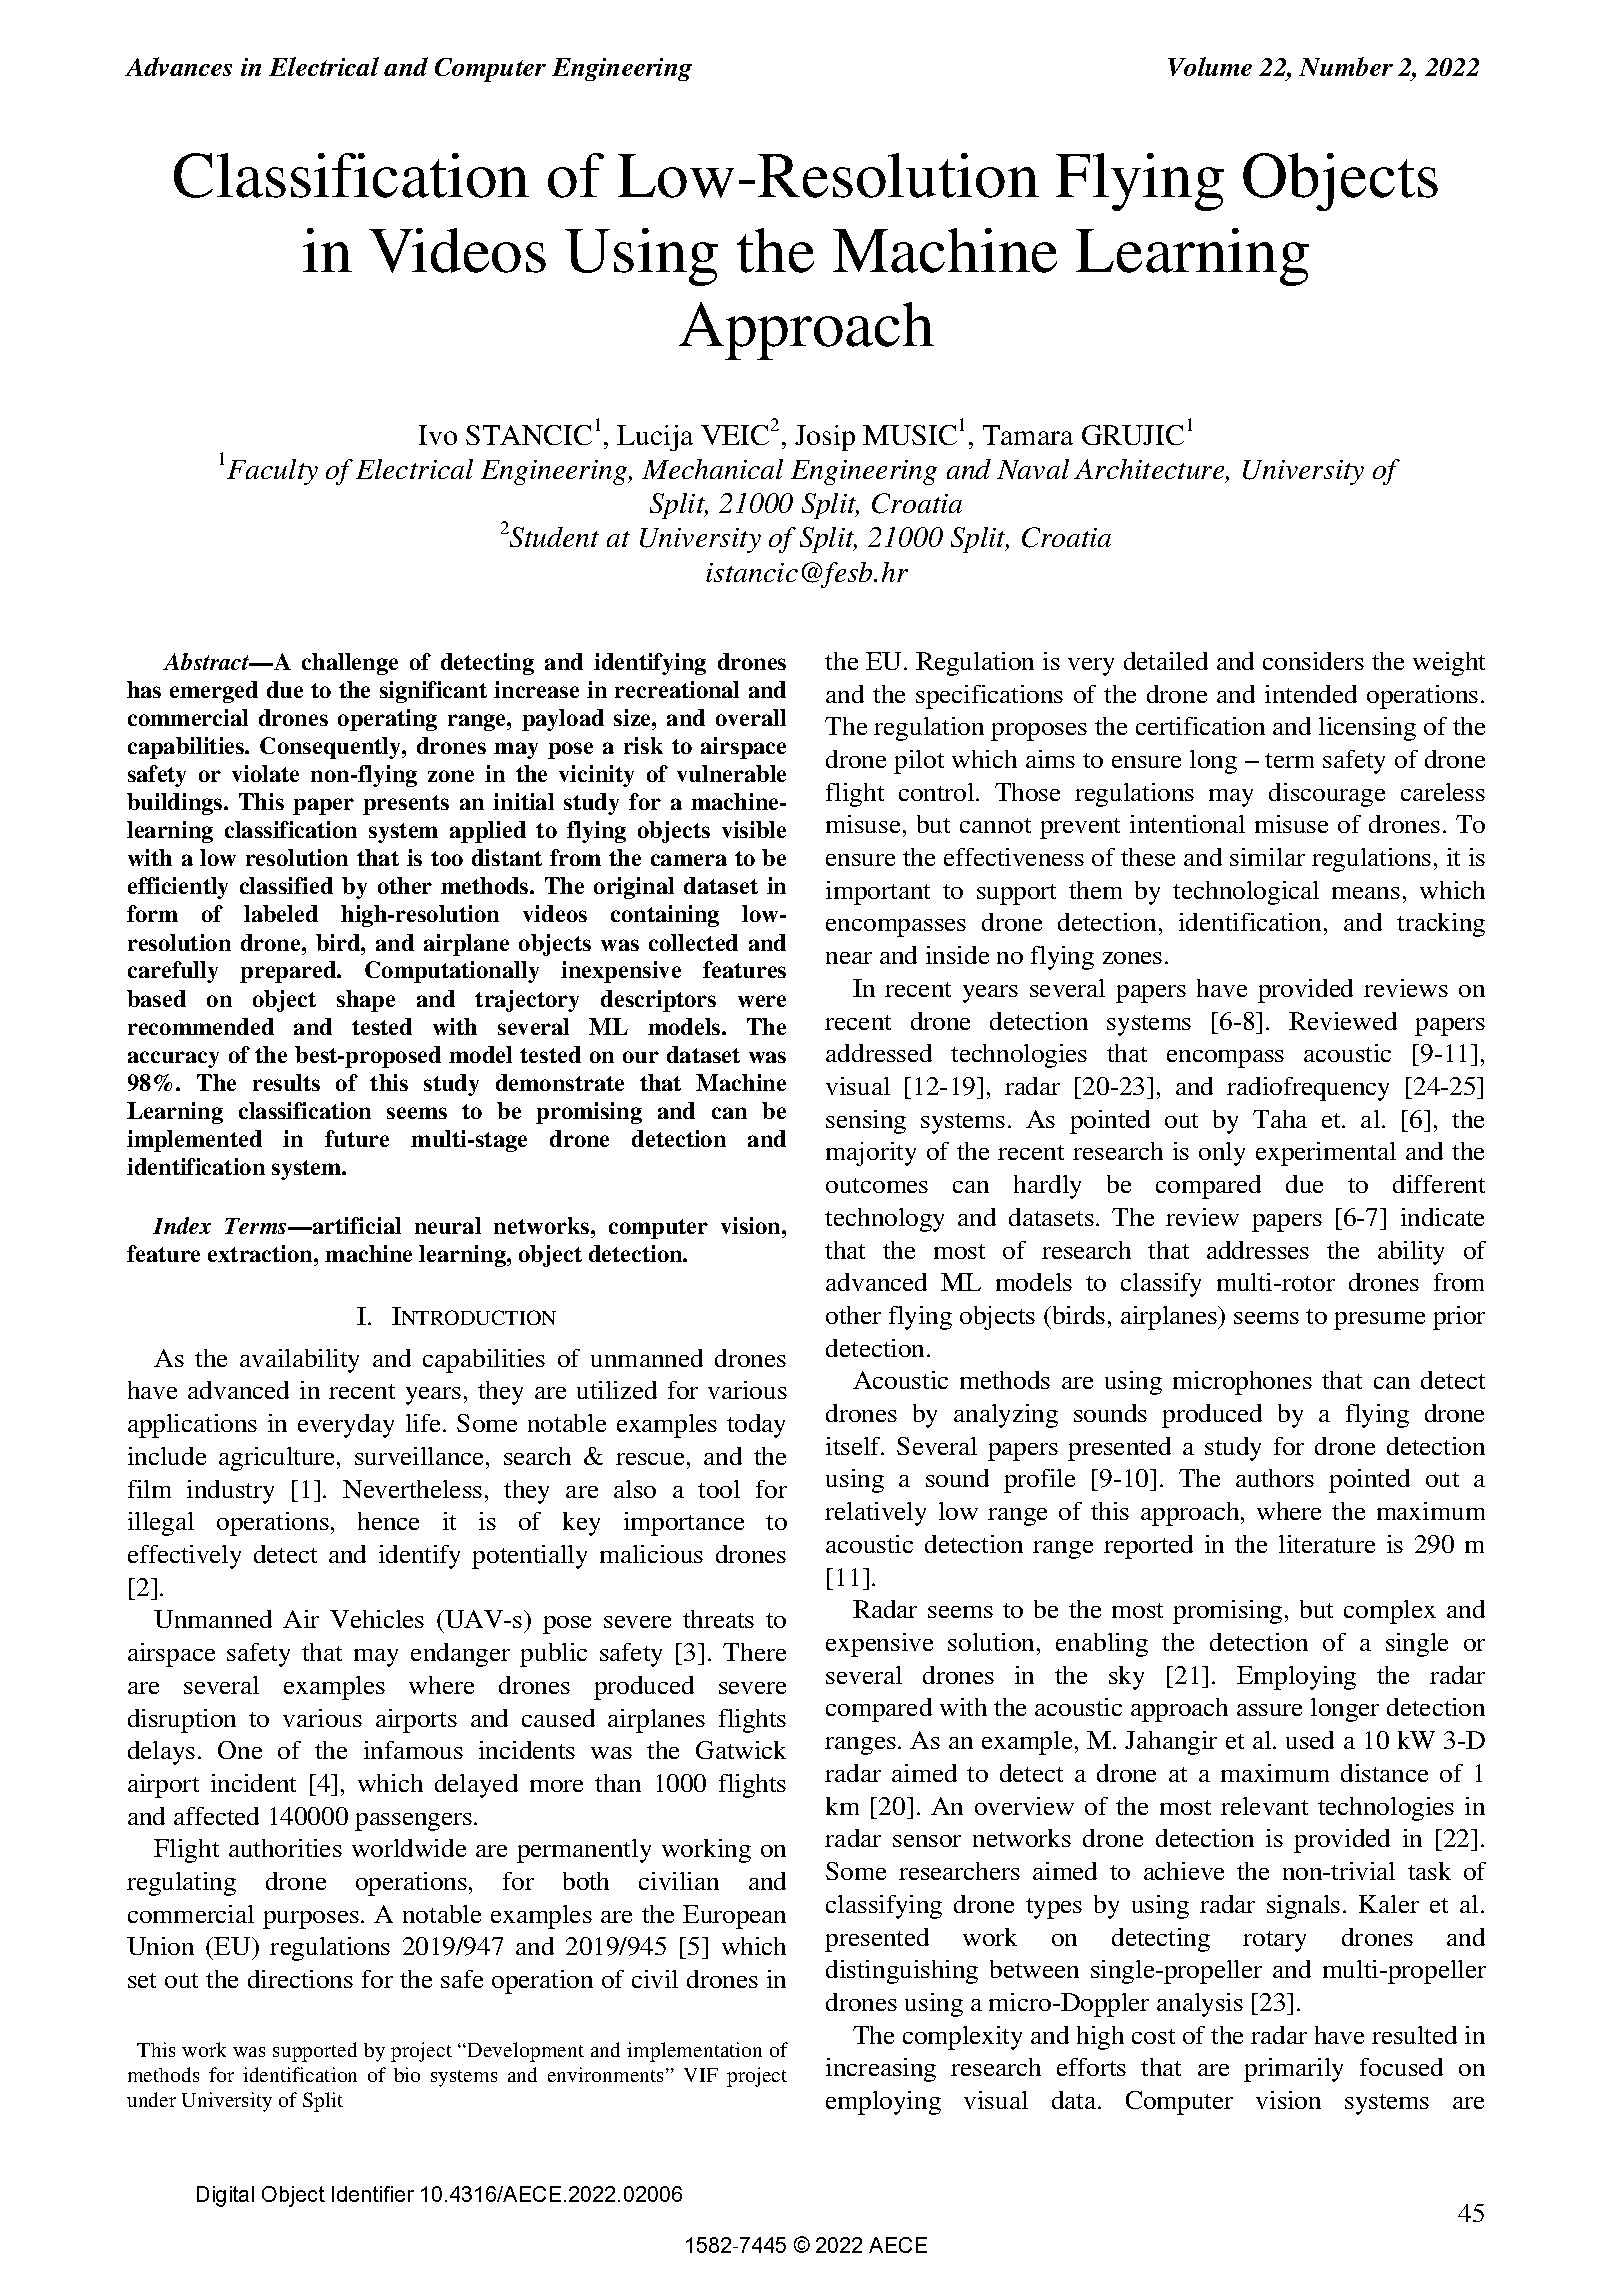 PDF Quickview for paper with DOI:10.4316/AECE.2022.02006